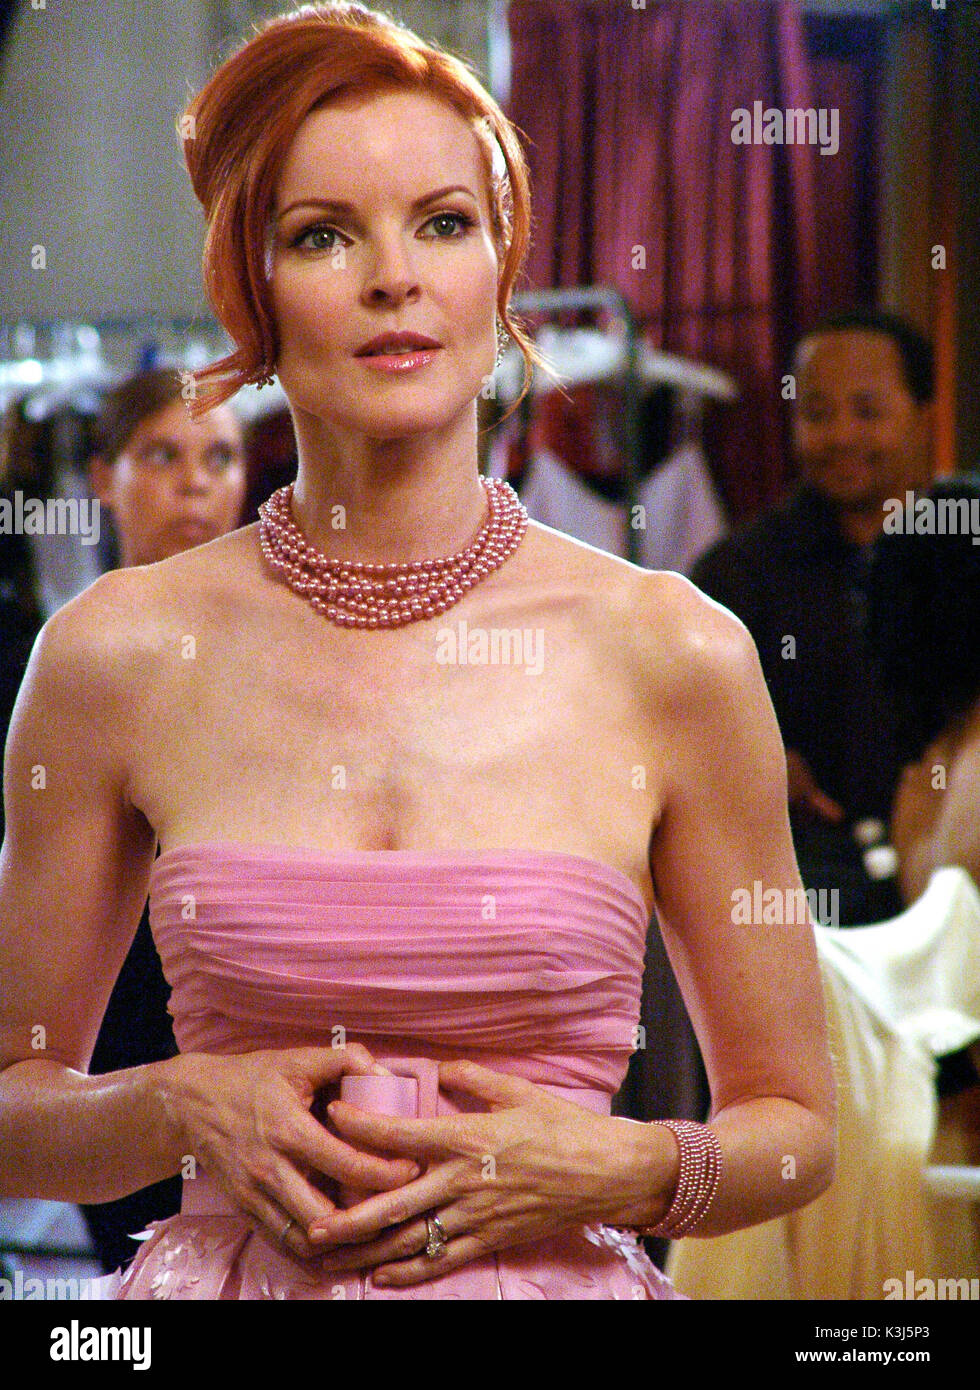 DESPERATE HOUSEWIVES - Suspicious Minds MARCIA CROSS DESPERATE HOUSEWIVES  Series#1/Episode#9/Suspicious Minds MARCIA CROSS as Bree Van De Kamp     Date: 2004 Stock Photo